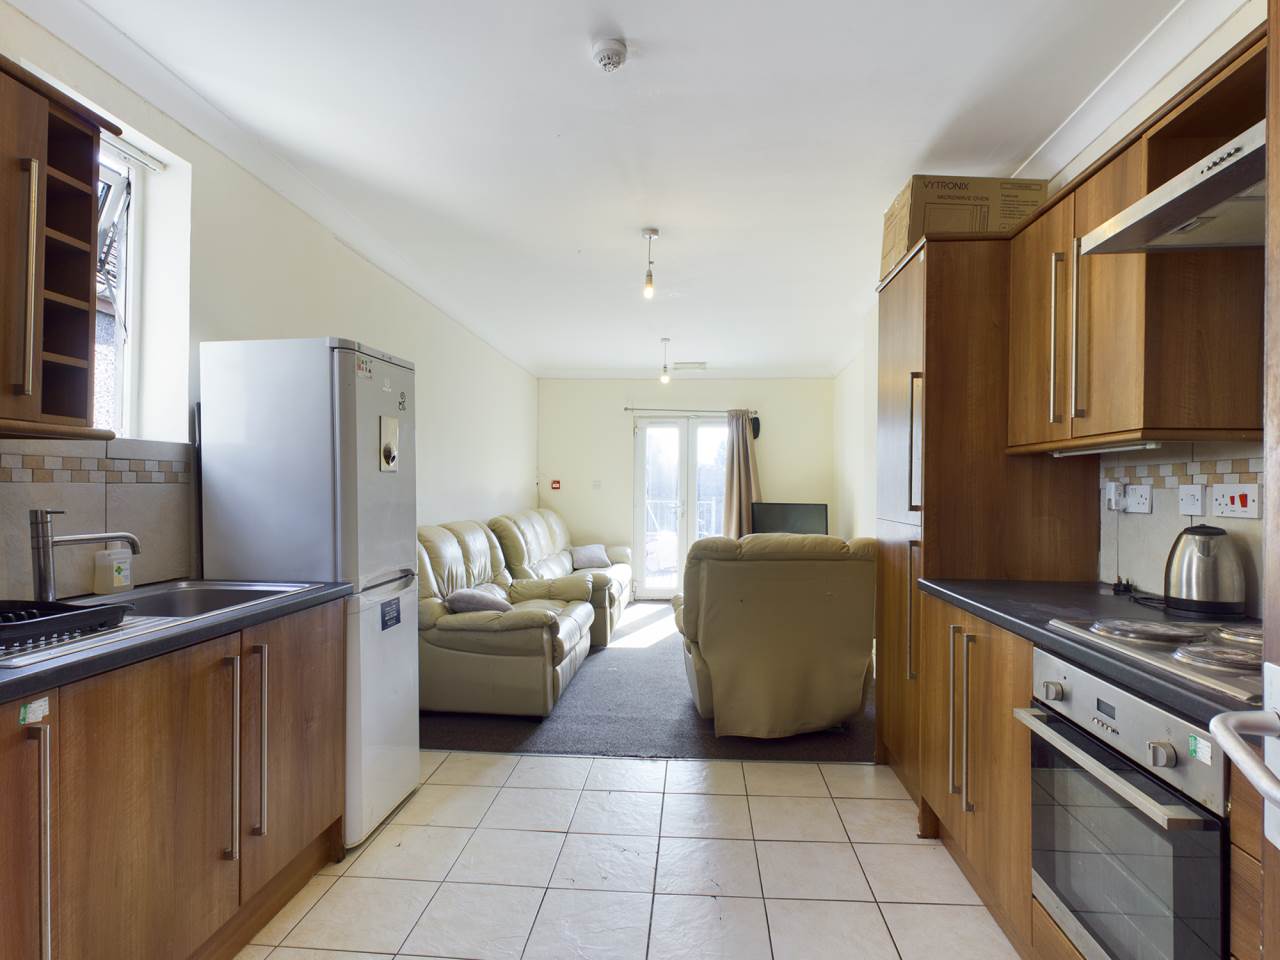 5 bed house to rent in BRYNYMOR CRESCENT, UPLANDS  - Property Image 2